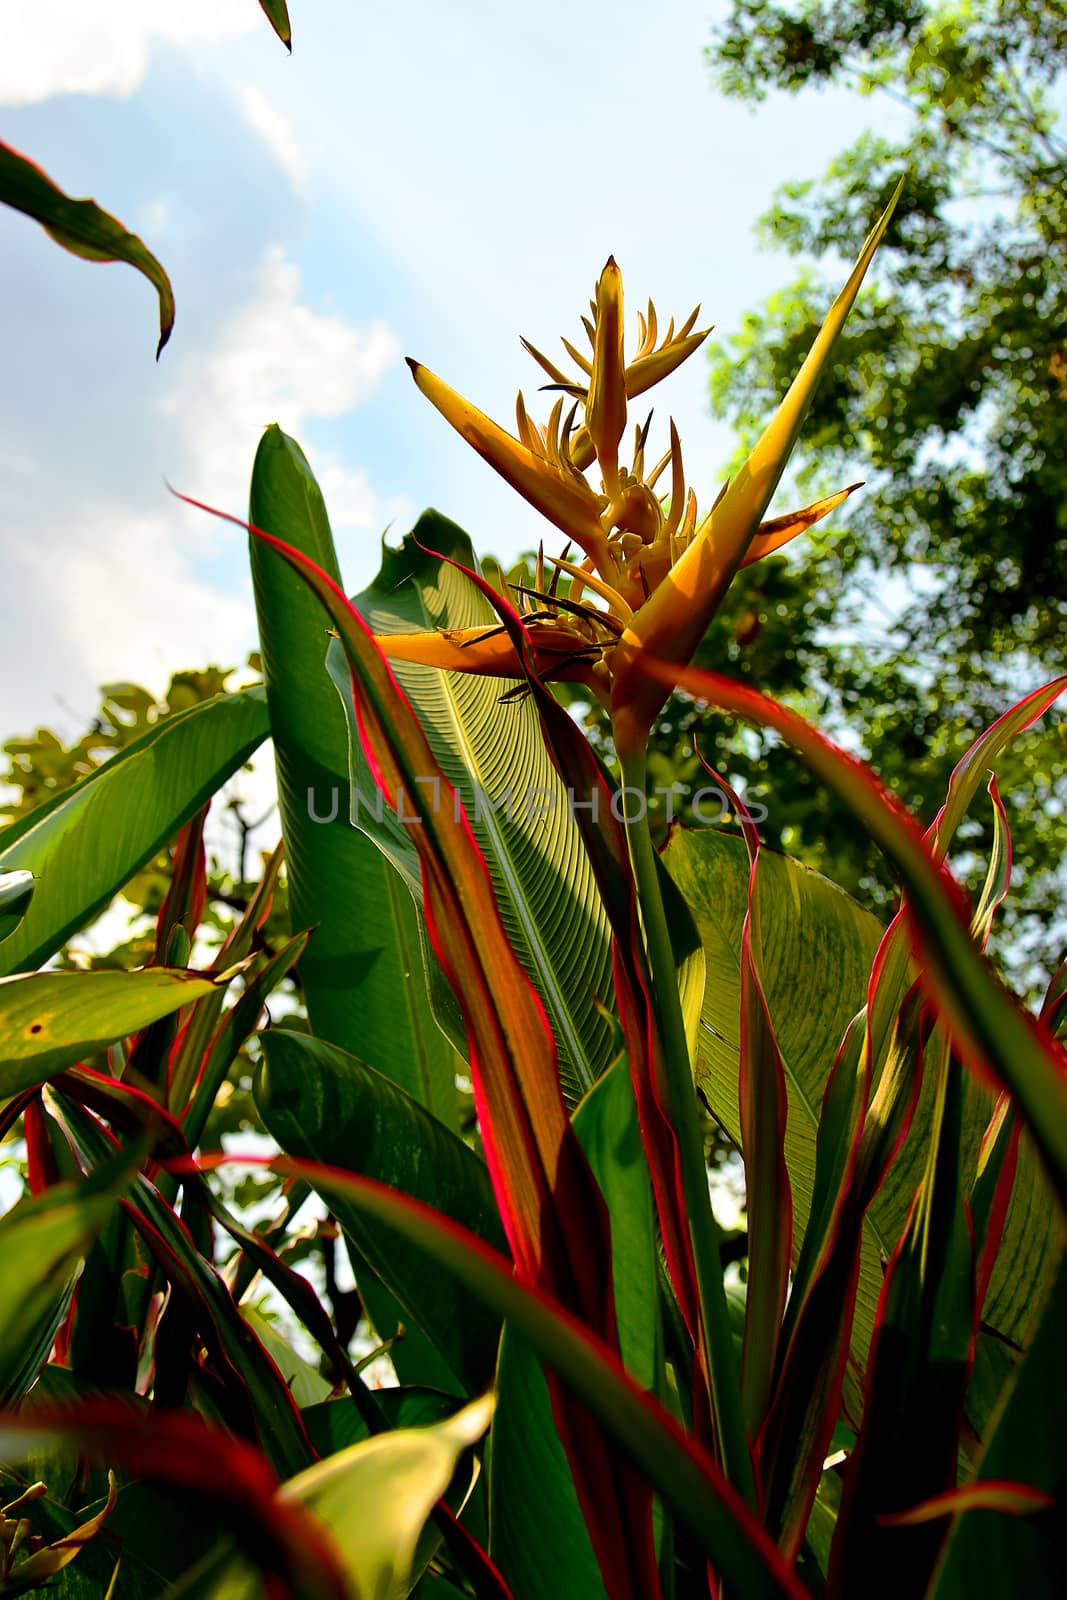 Under view of Yellow Heliconia Torch Flowers by AekPN